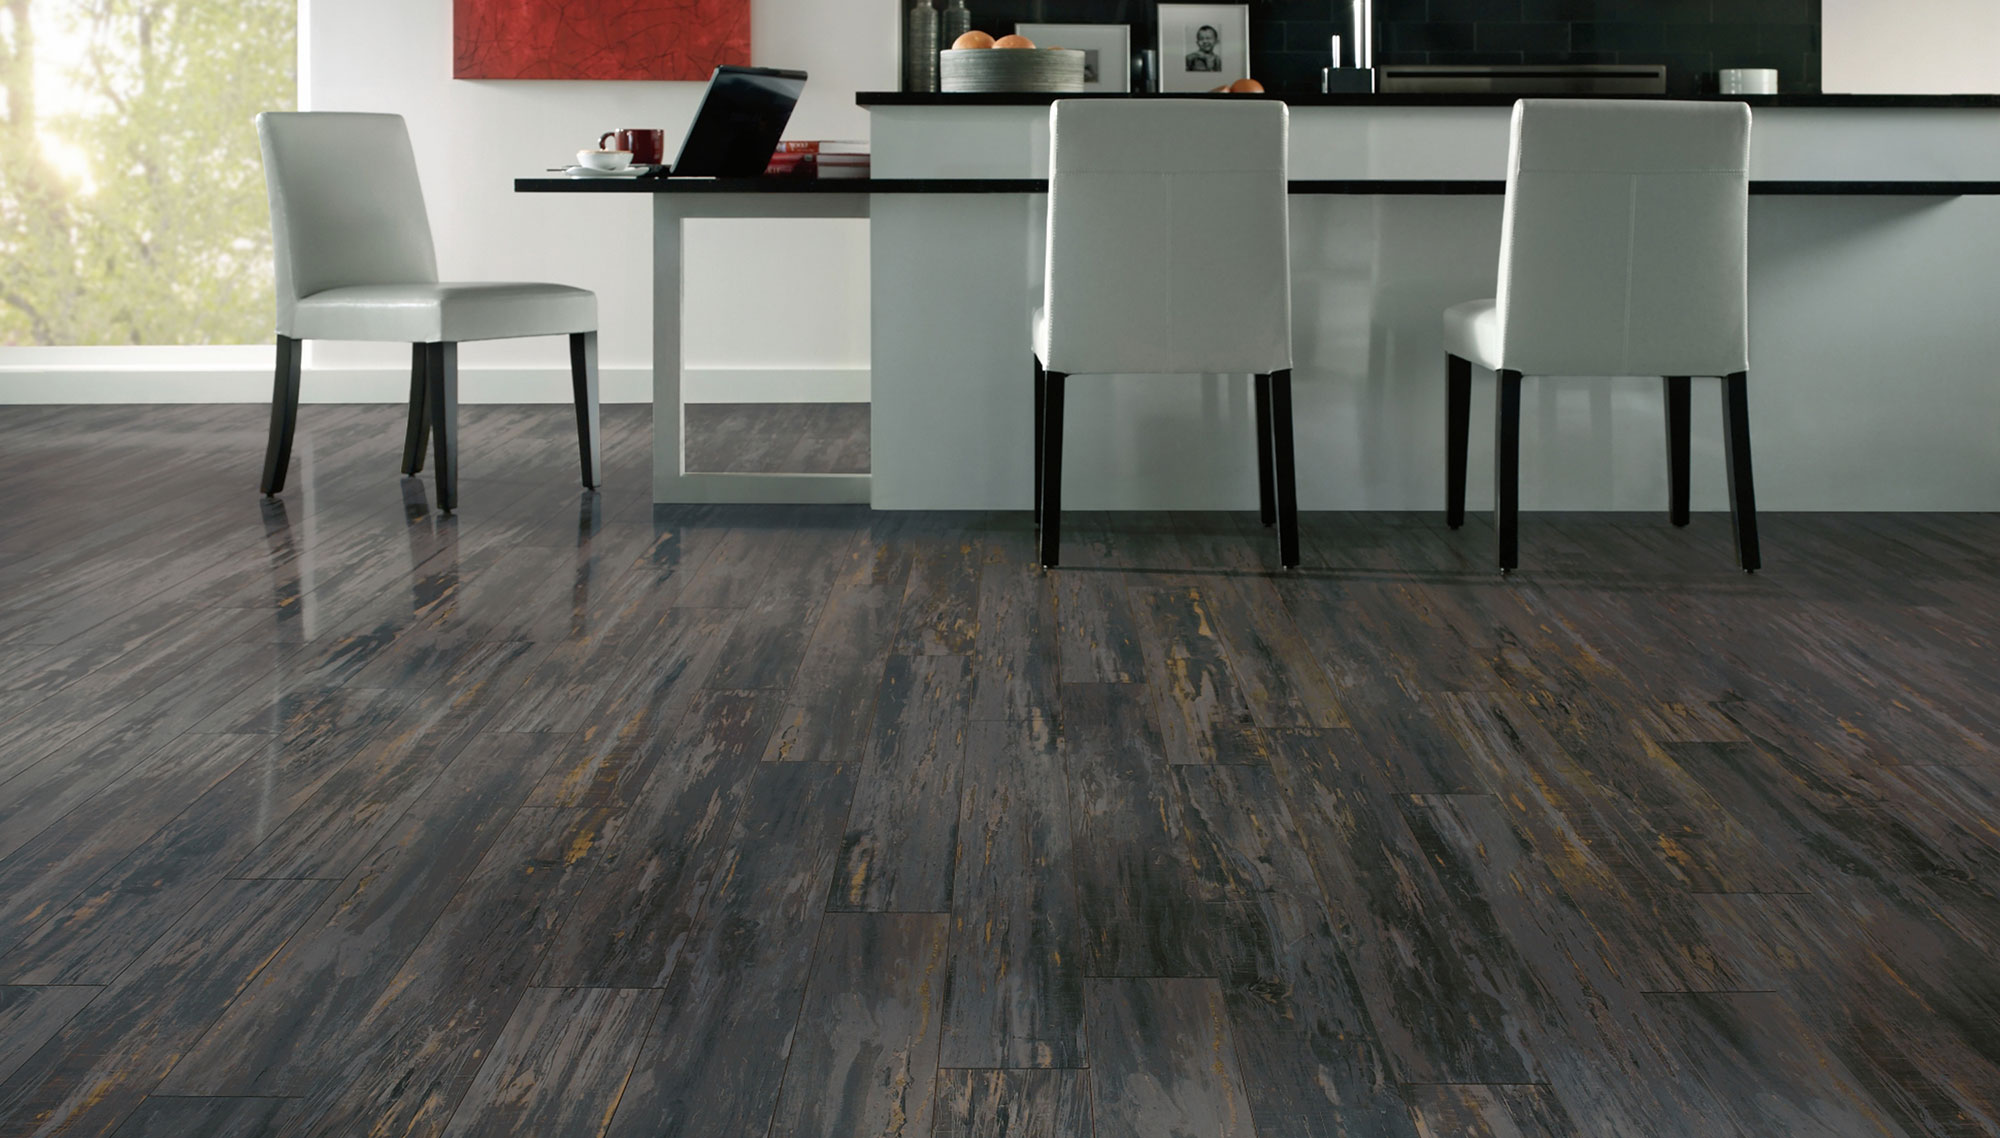 Color Hardwood For Calm Color Hardwood Laminate Flooring For Kitchen With Amusing Chair Facing Long Counter Interior Design Hardwood Laminate Flooring System For Astonishing Look